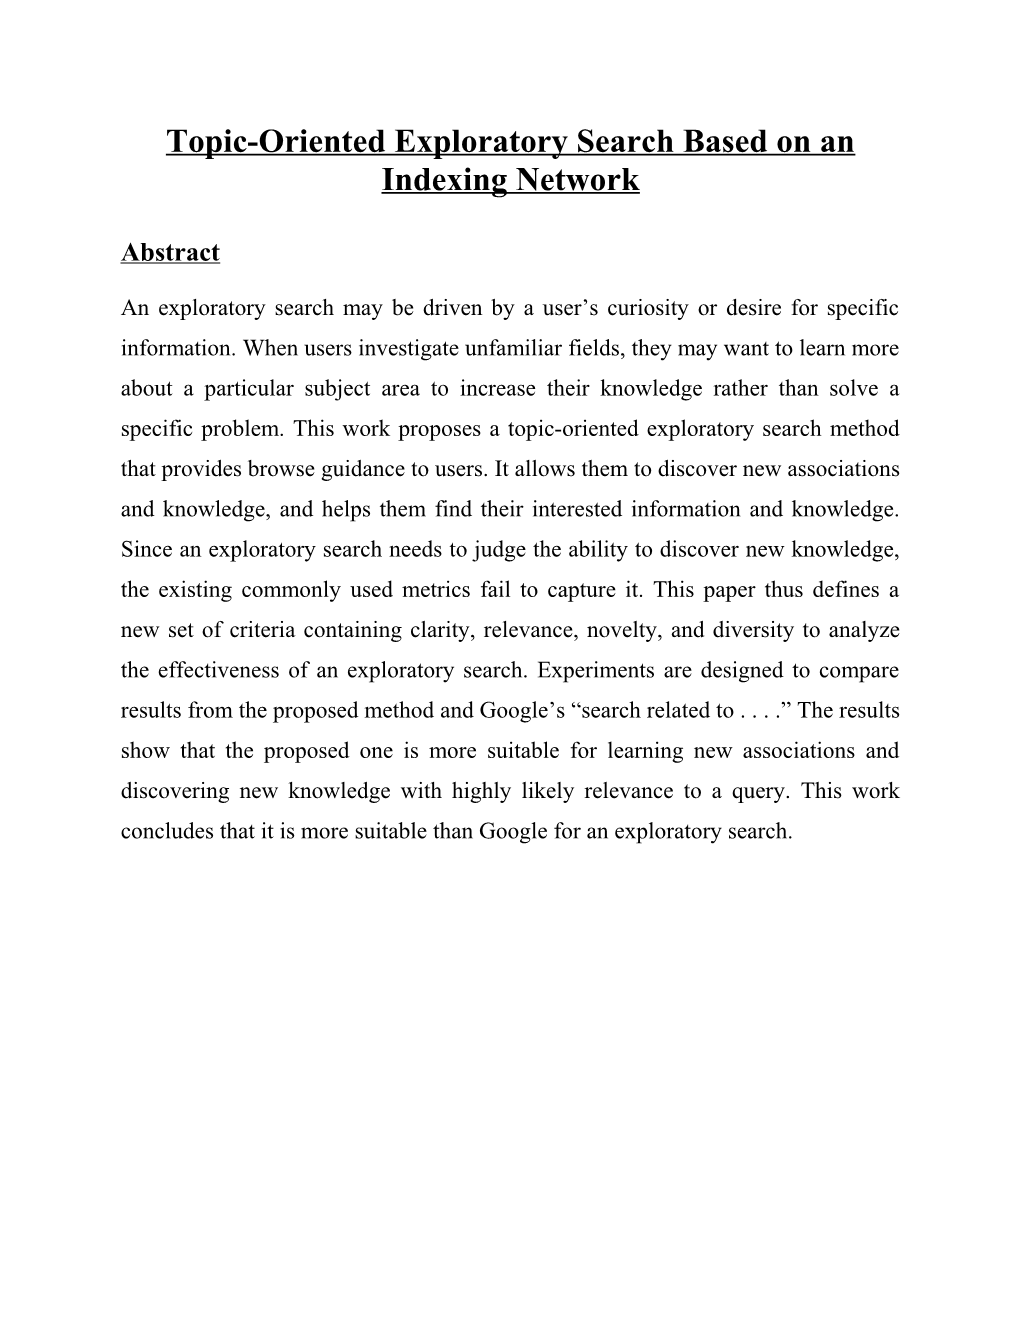 Topic-Oriented Exploratory Search Based on an Indexing Network